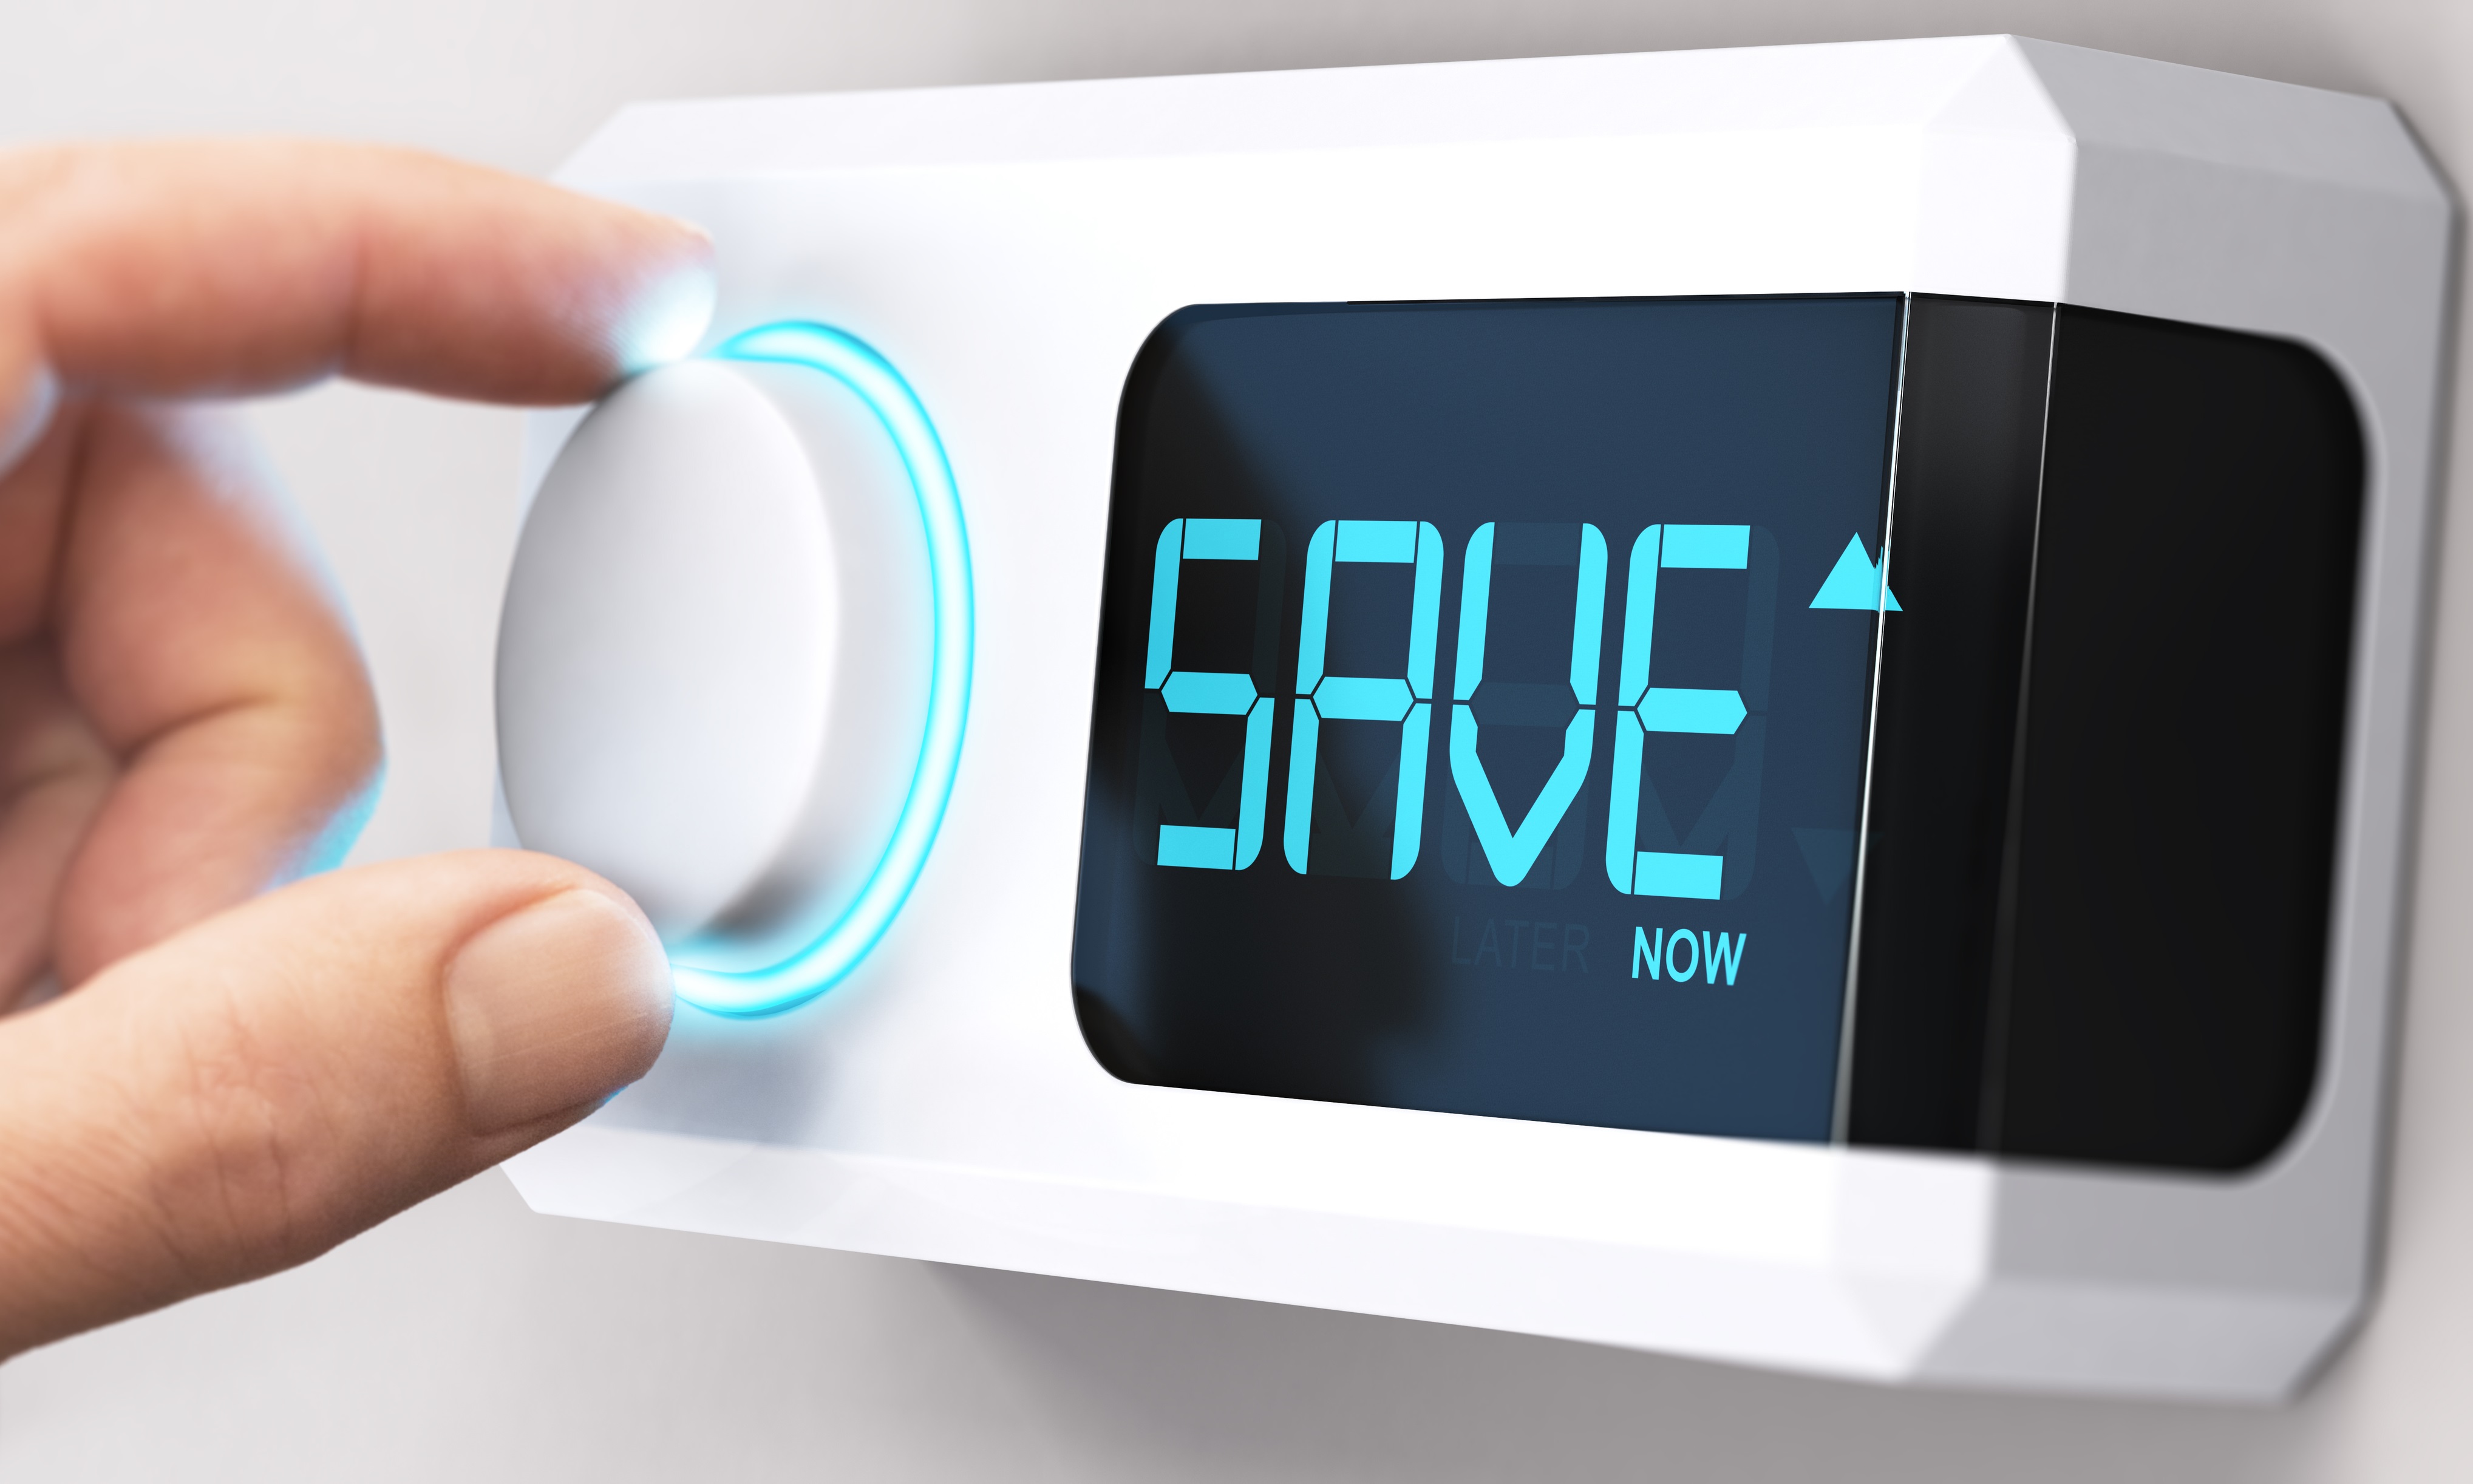 what-are-the-latest-energy-saving-devices-for-the-home-2020